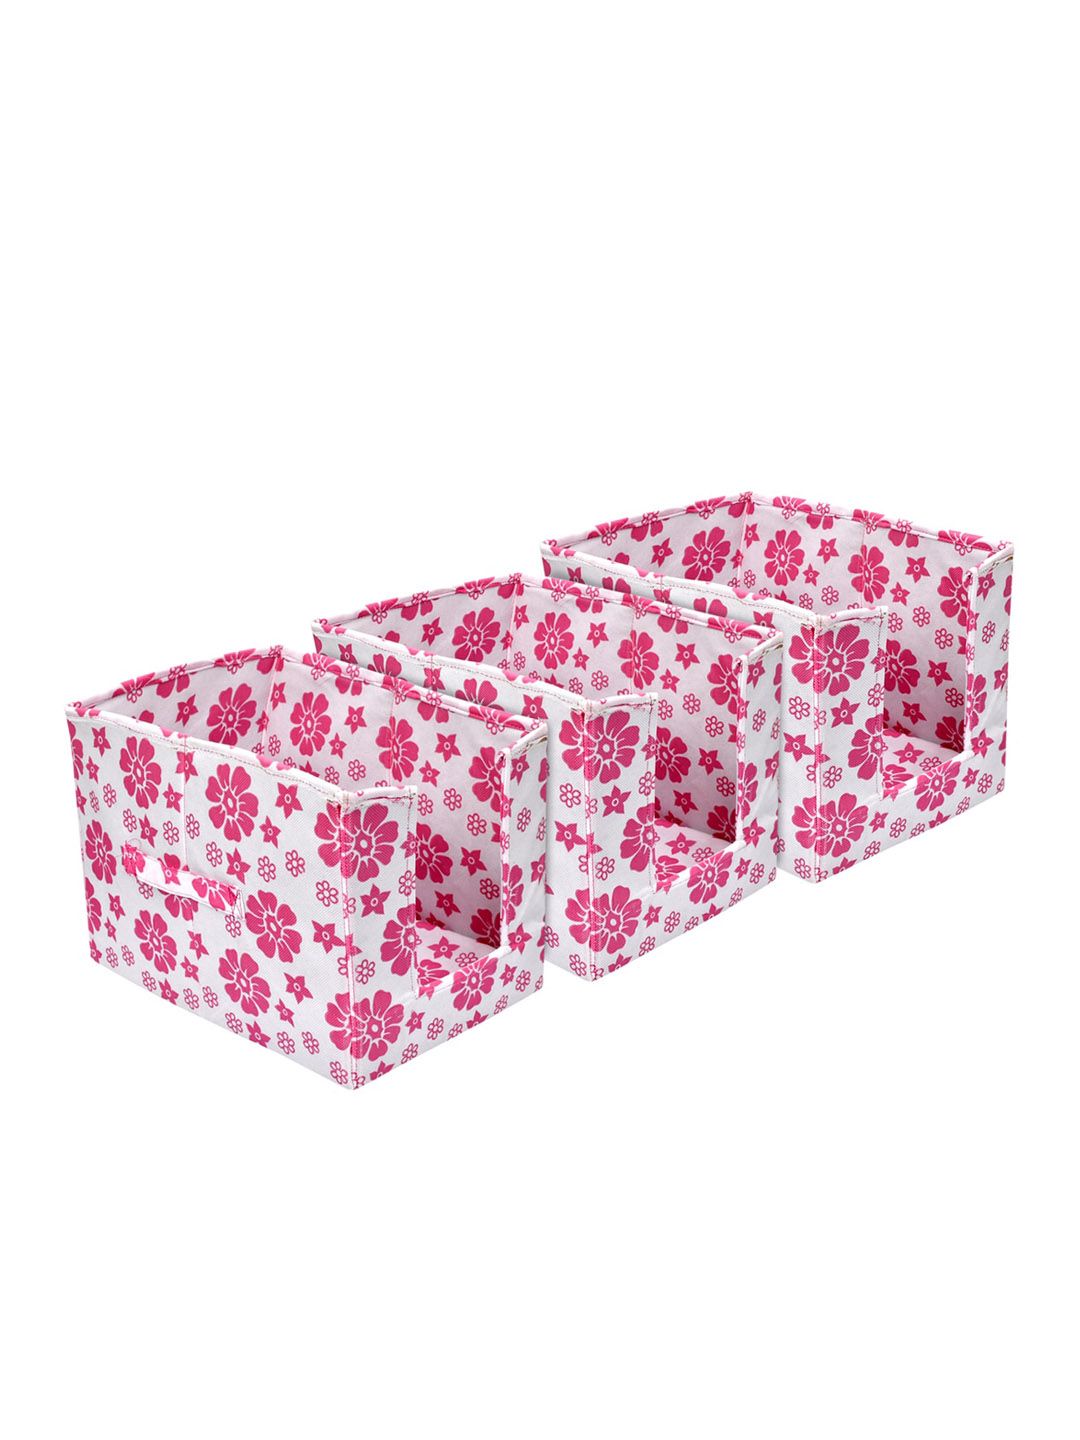 Kuber Industries Set Of 3 White & Pink Flower Printed Shirt Stacker Organisers With Handles Price in India